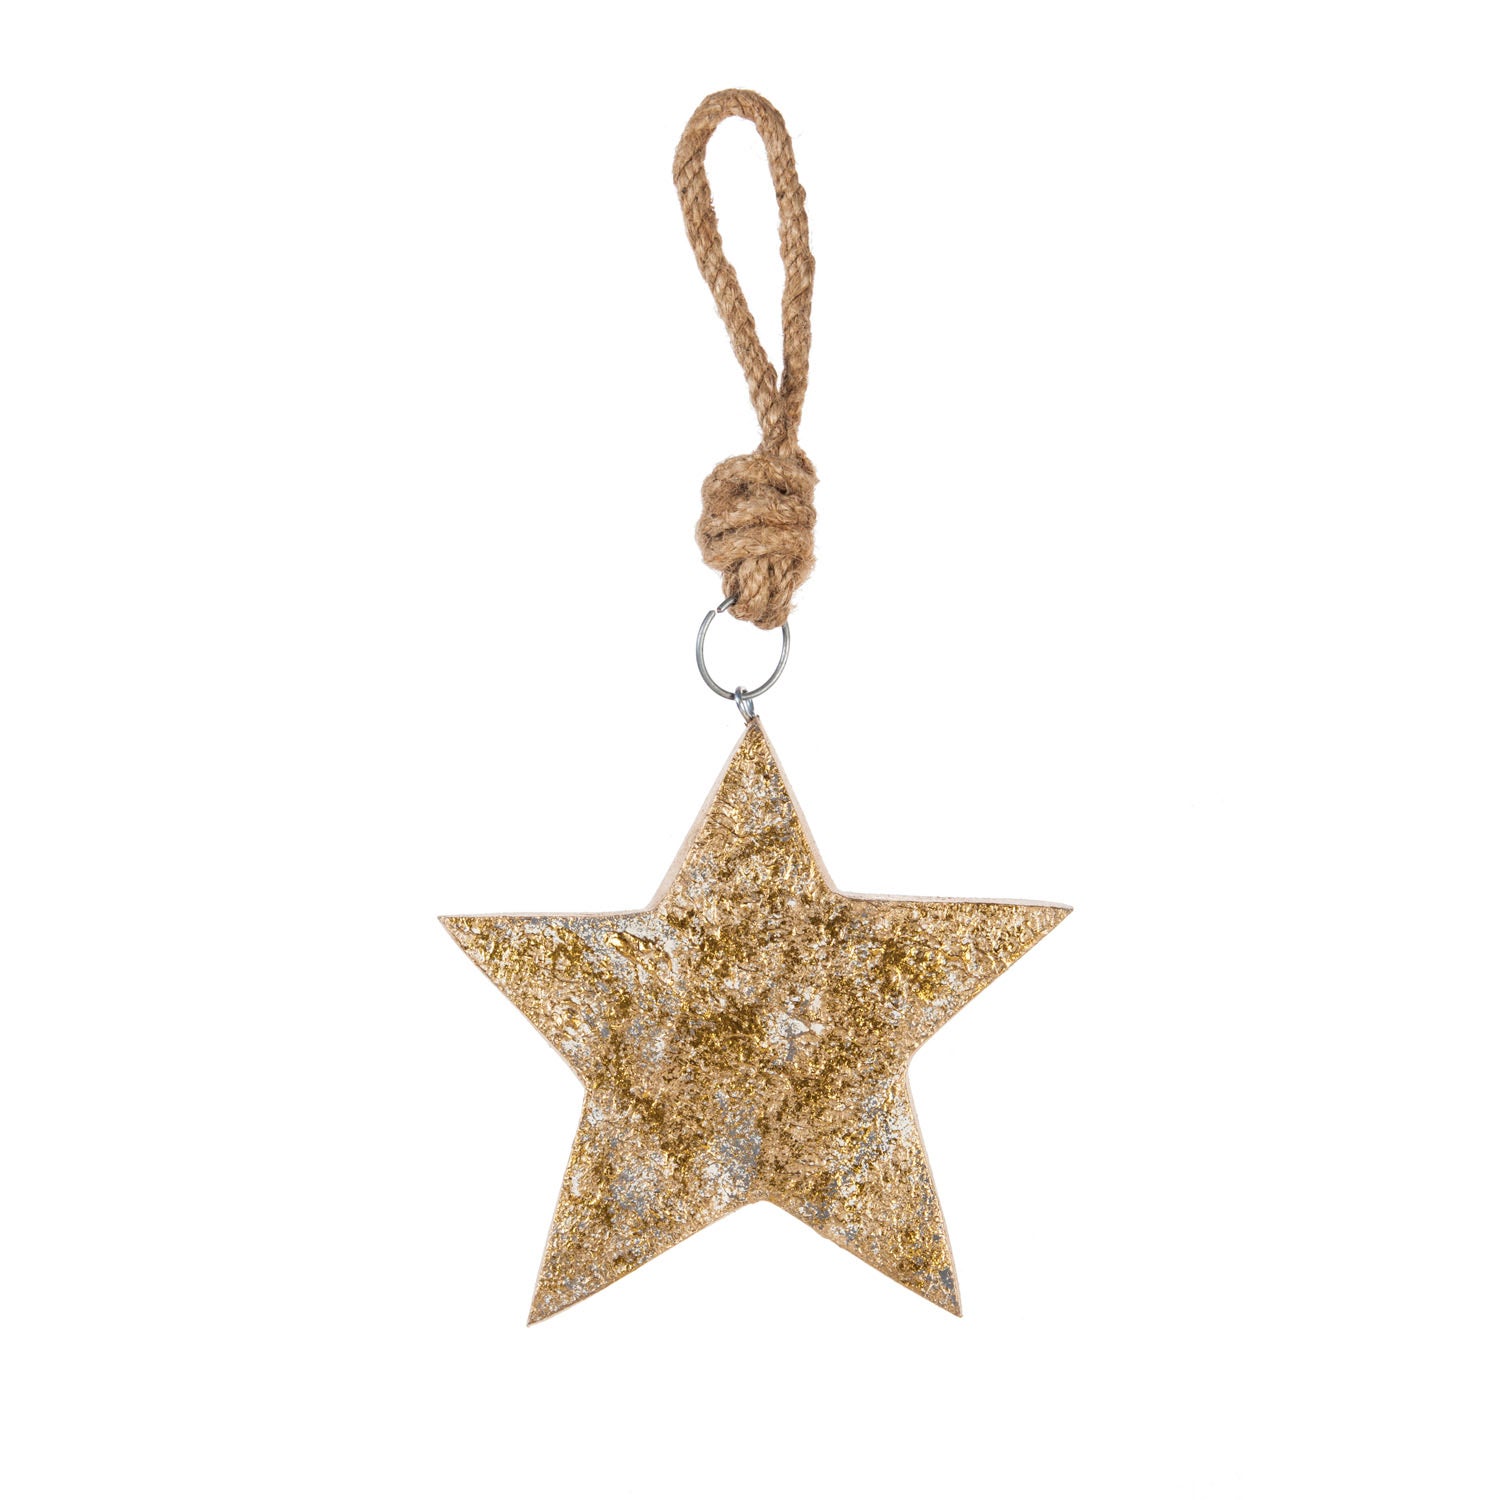 Wooden Star Ornaments with Gold and Rope Hanging Cord Set of 3